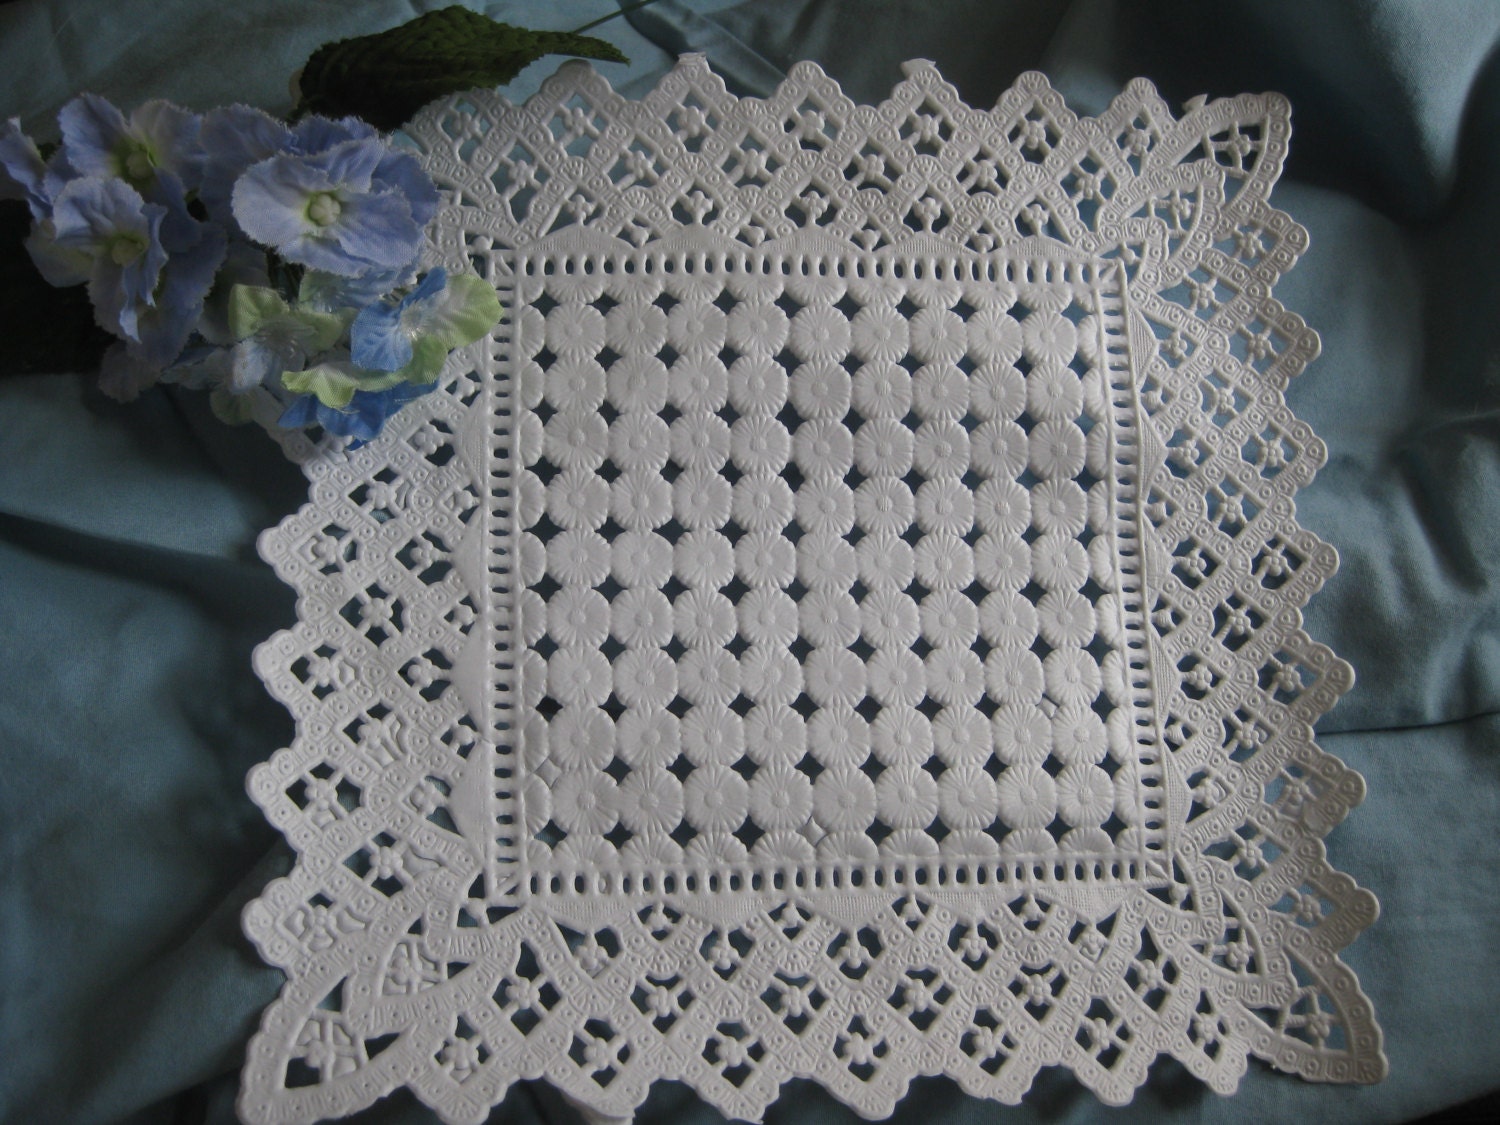 500 Lace Paper Doilies 4 inch - Paper Doily - White Lace Paper Doily - Bulk  Paper Doily - Wholesale Paper Doily - Pretty Packaging